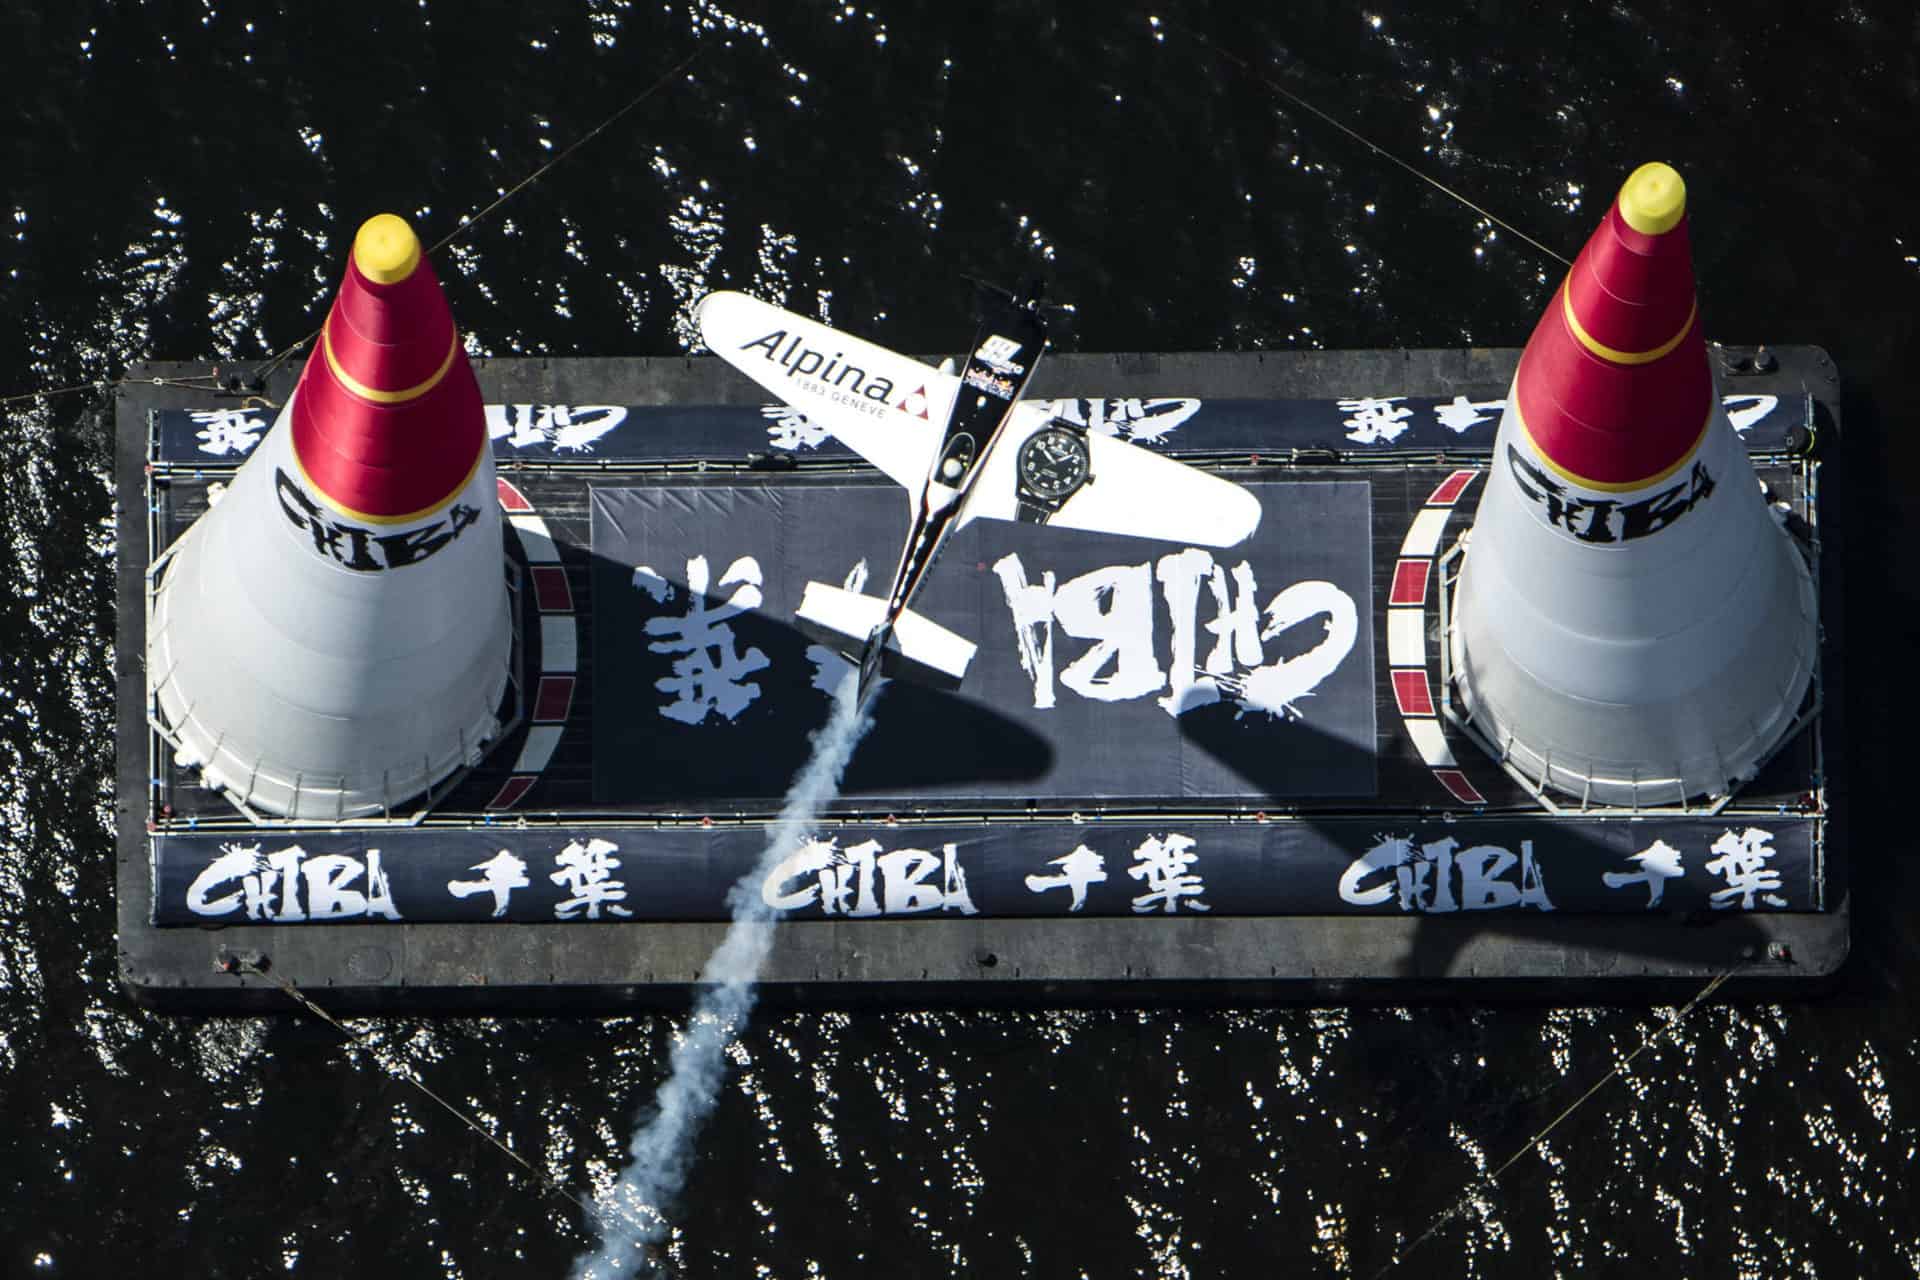 Red Bull Air Race World Championship Round 3 in Chiba: Amazing performance